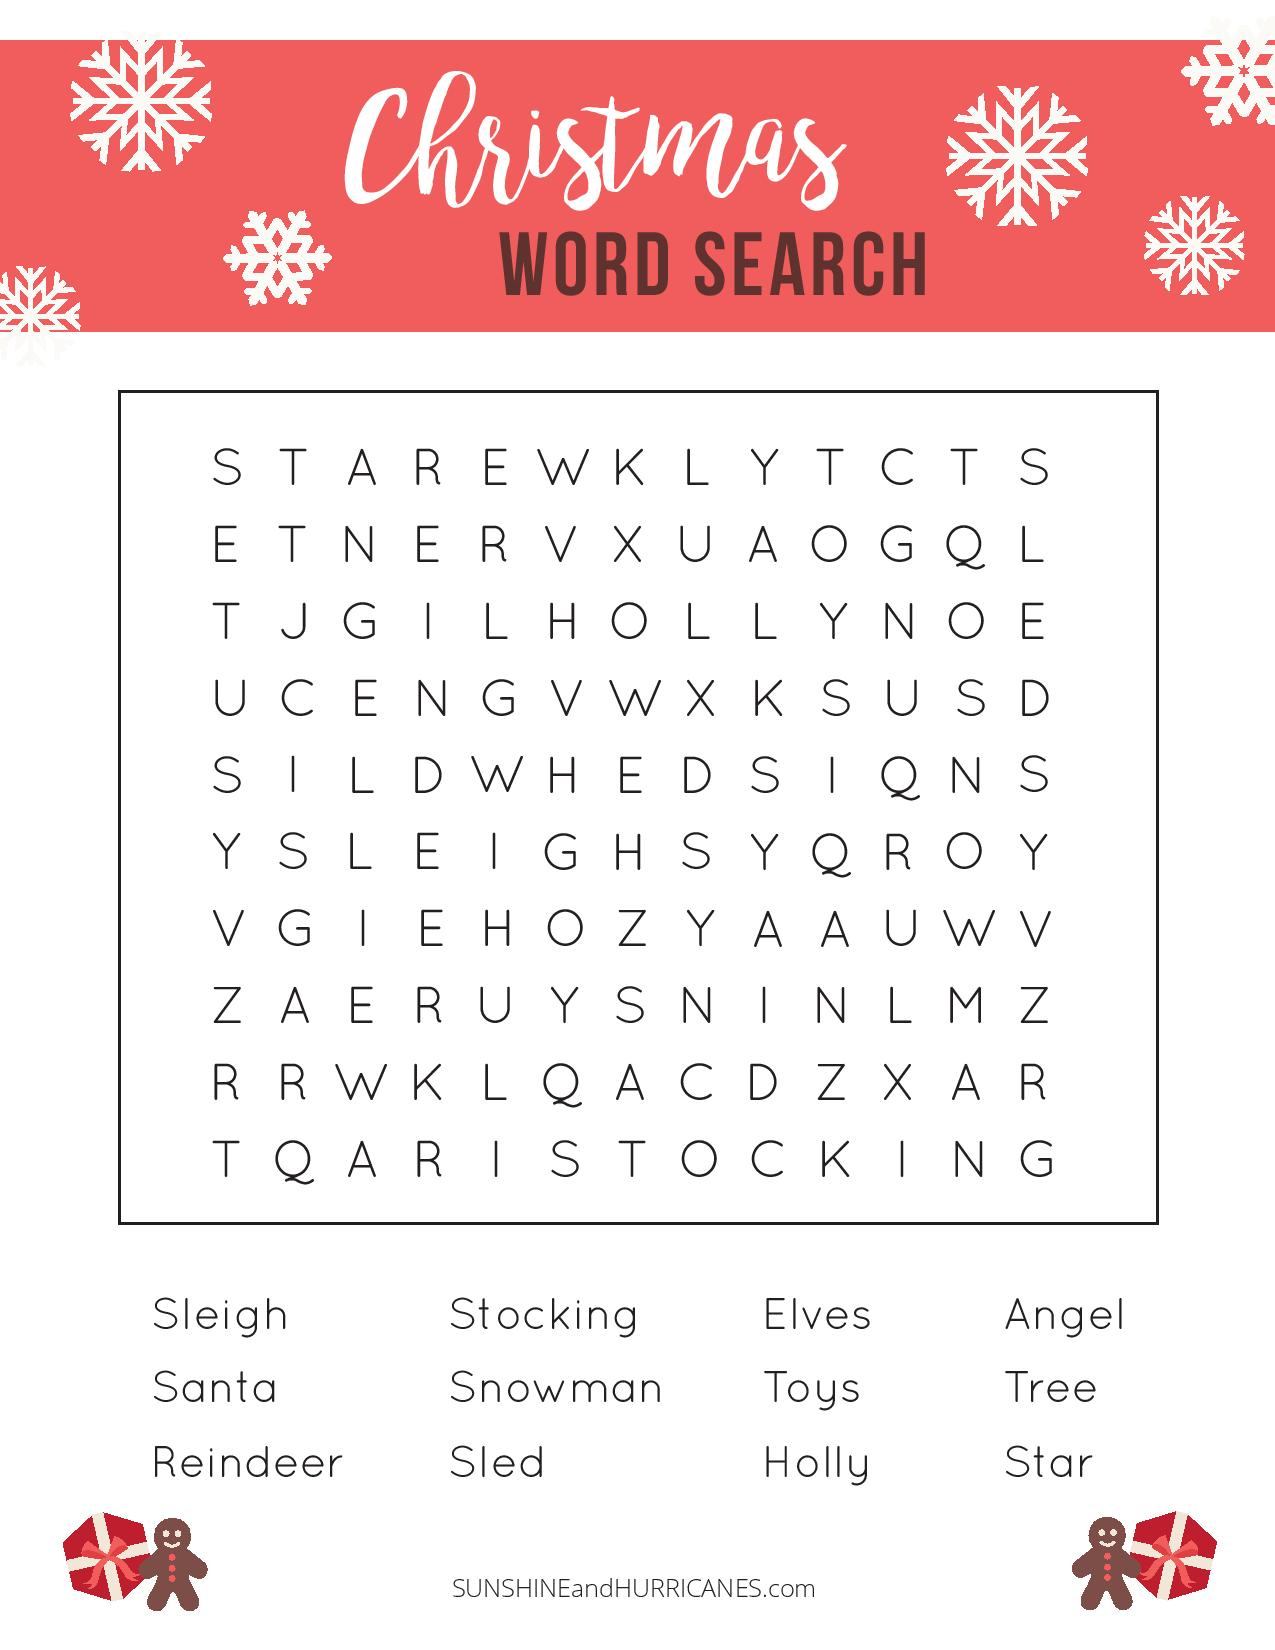 Printable Christmas Word Search - A Fun Holiday Activity For